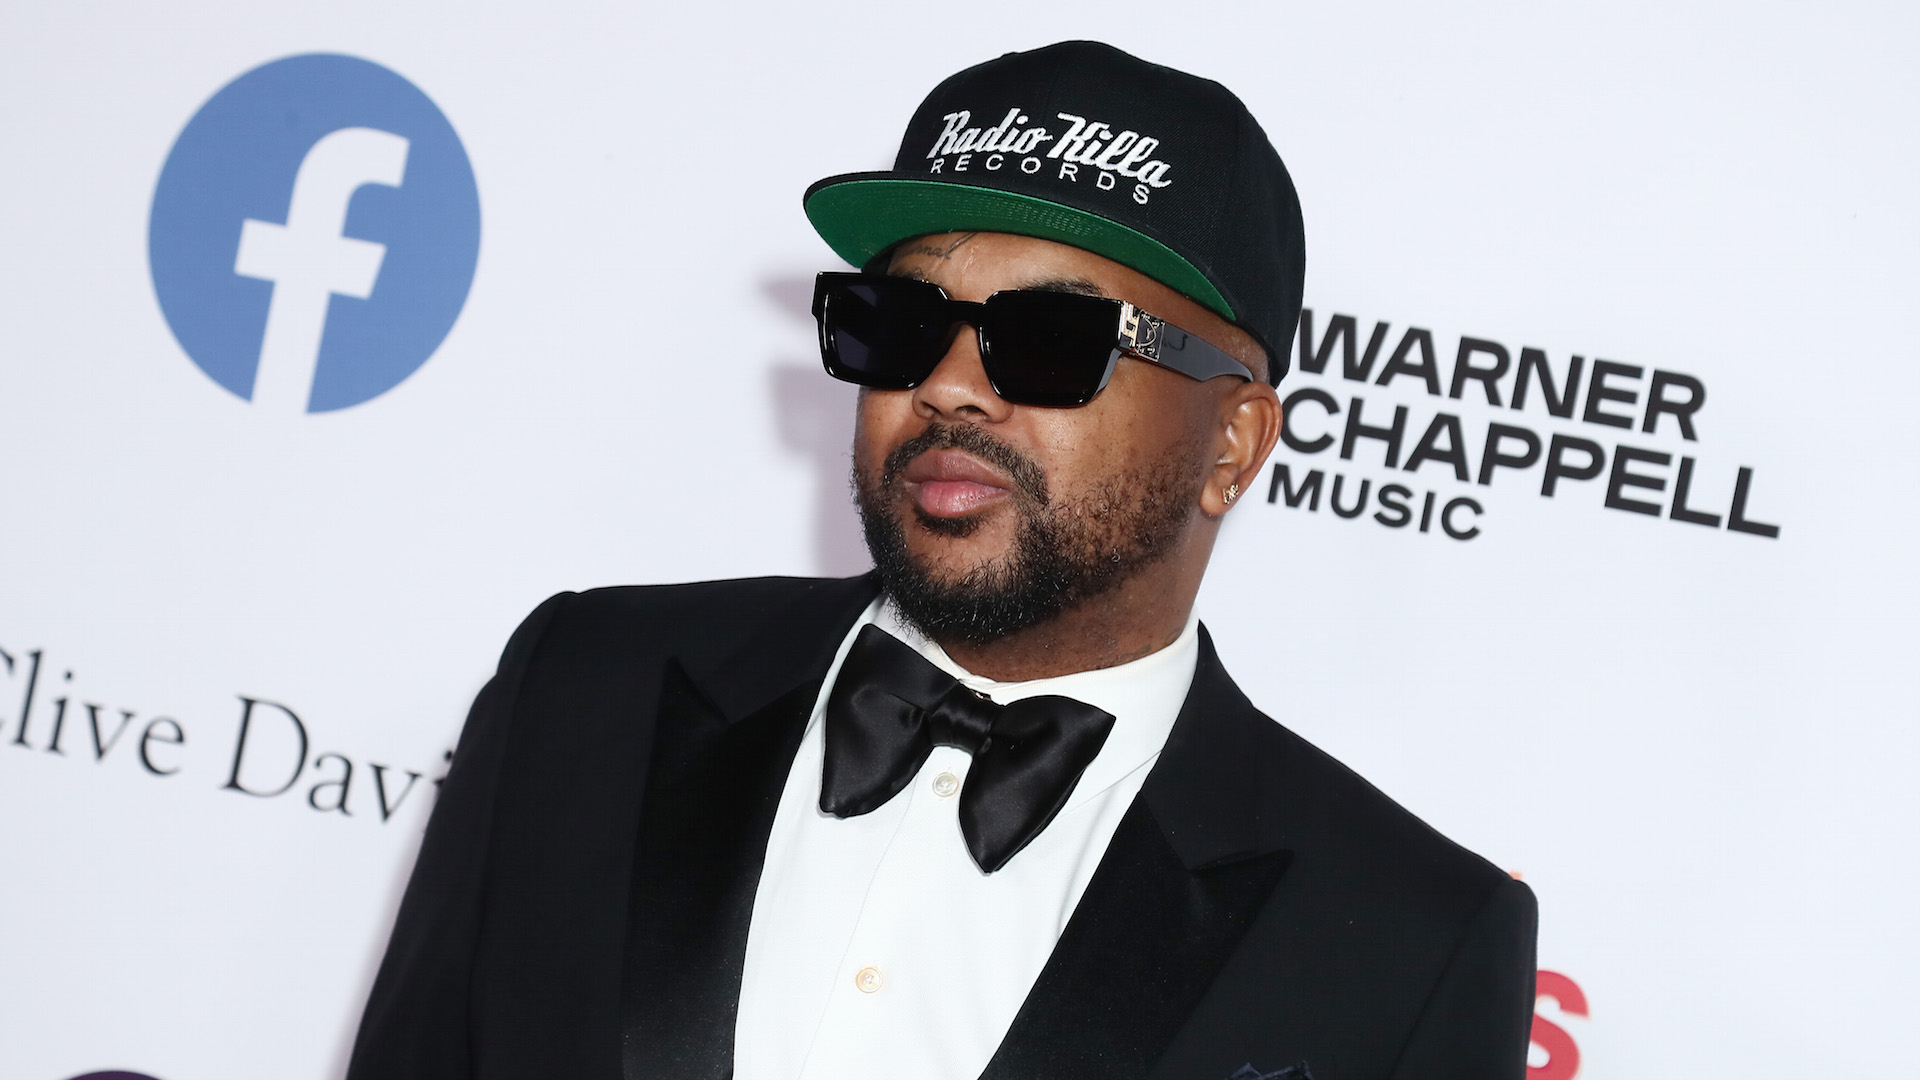 The-Dream Comments on 'Signed' Clip and Colorism Accusations: 'I'm Completely Surprised'